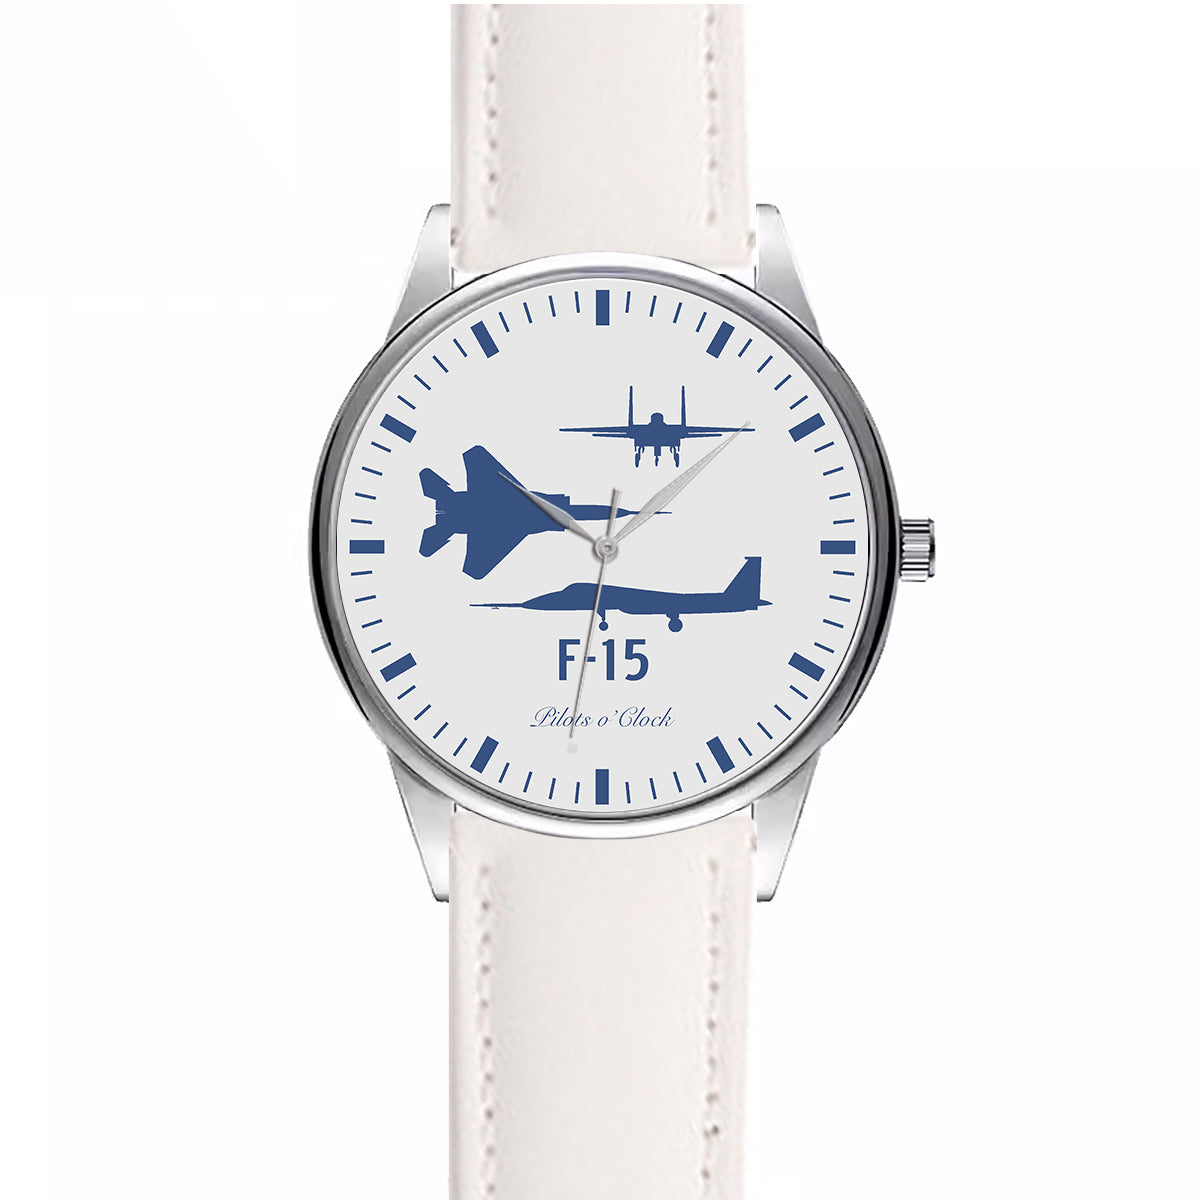 Fighting Falcon F-15 (Special) Designed Fashion Leather Strap Watches